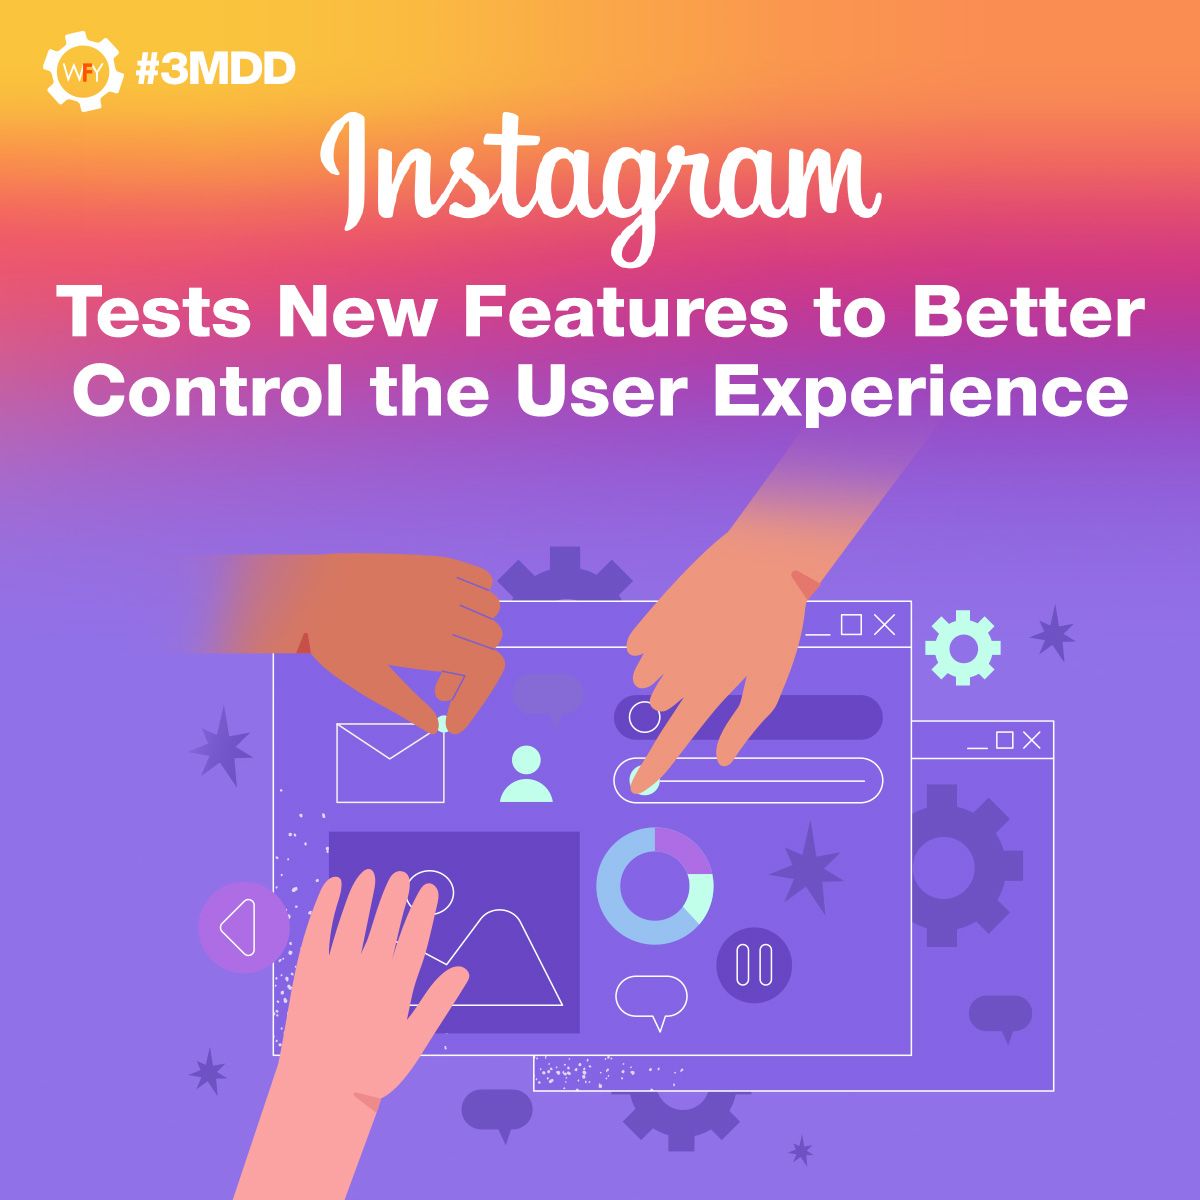 Instagram Tests New Features to Better Control the User Experience